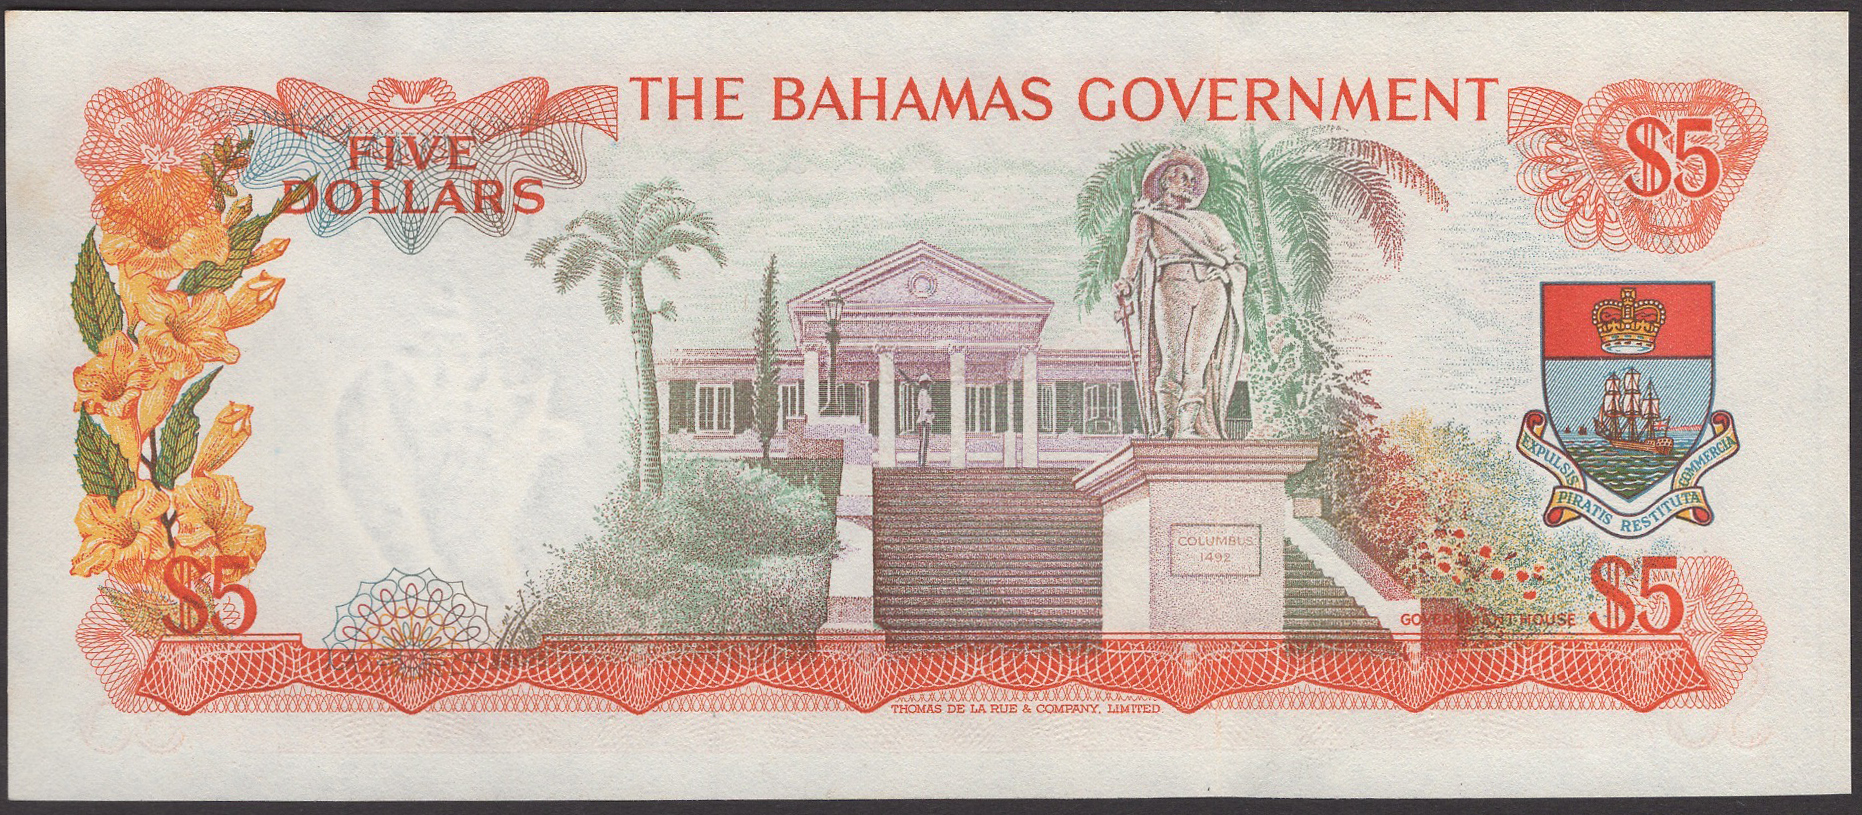 Bahamas Government, $5, 1965, serial number C768150, Francis, Higgs and Smiley-Butler... - Image 2 of 2